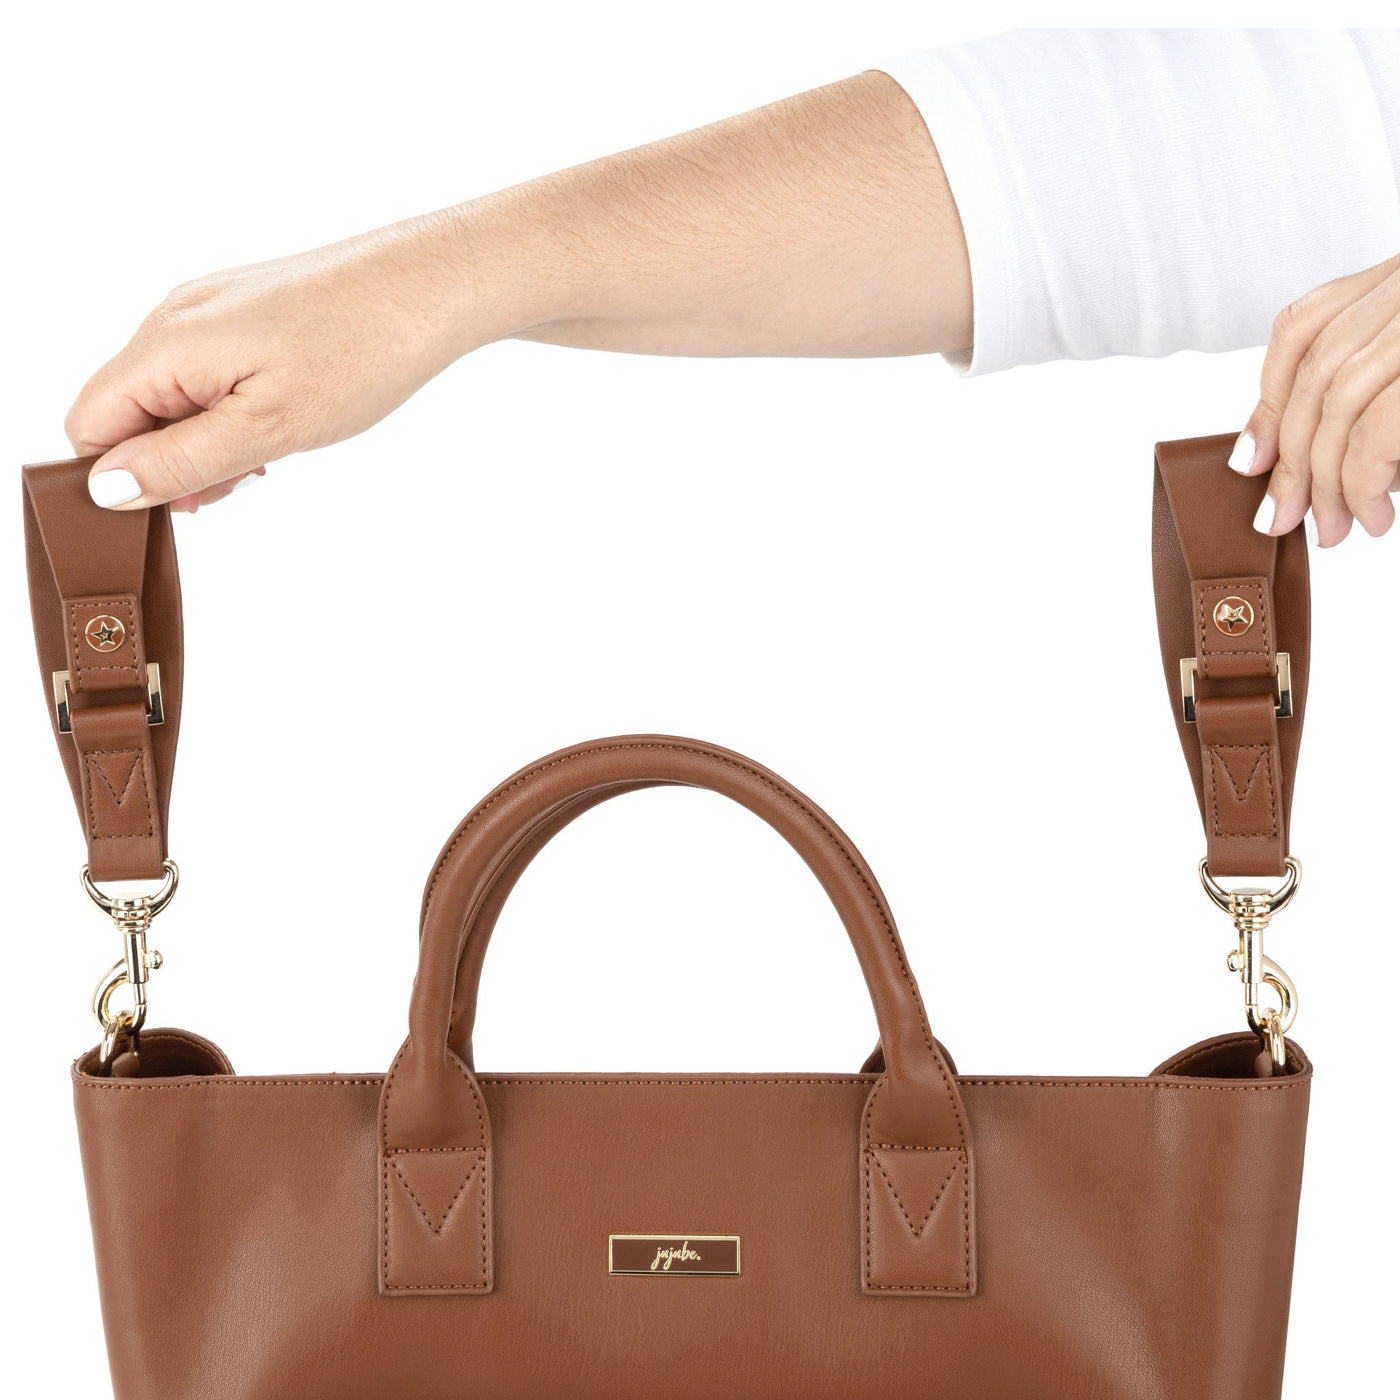 Witney Carson's 24-7 Tote - Spice